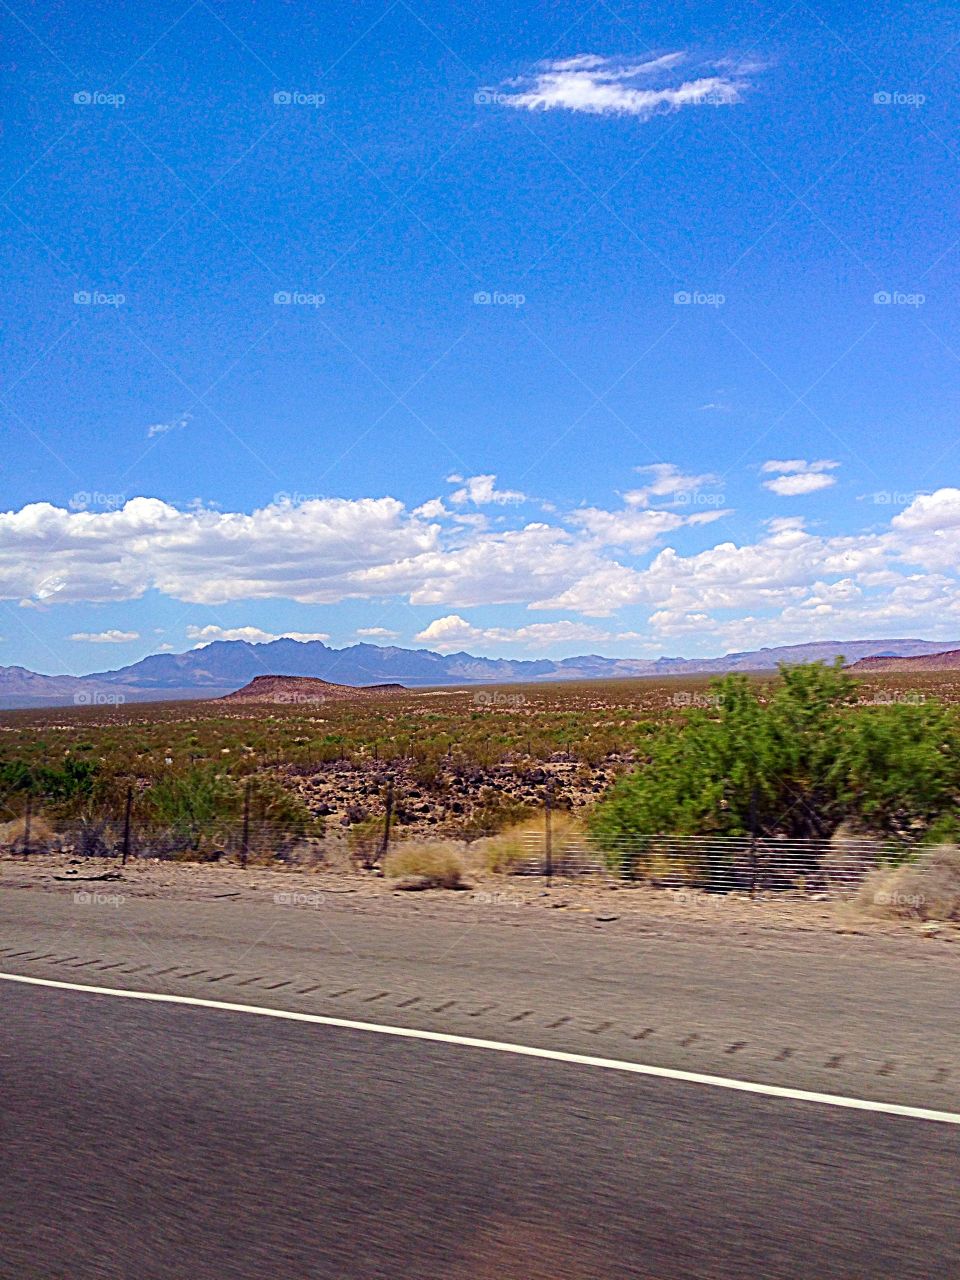 Road trip. On my way back from Laughlin